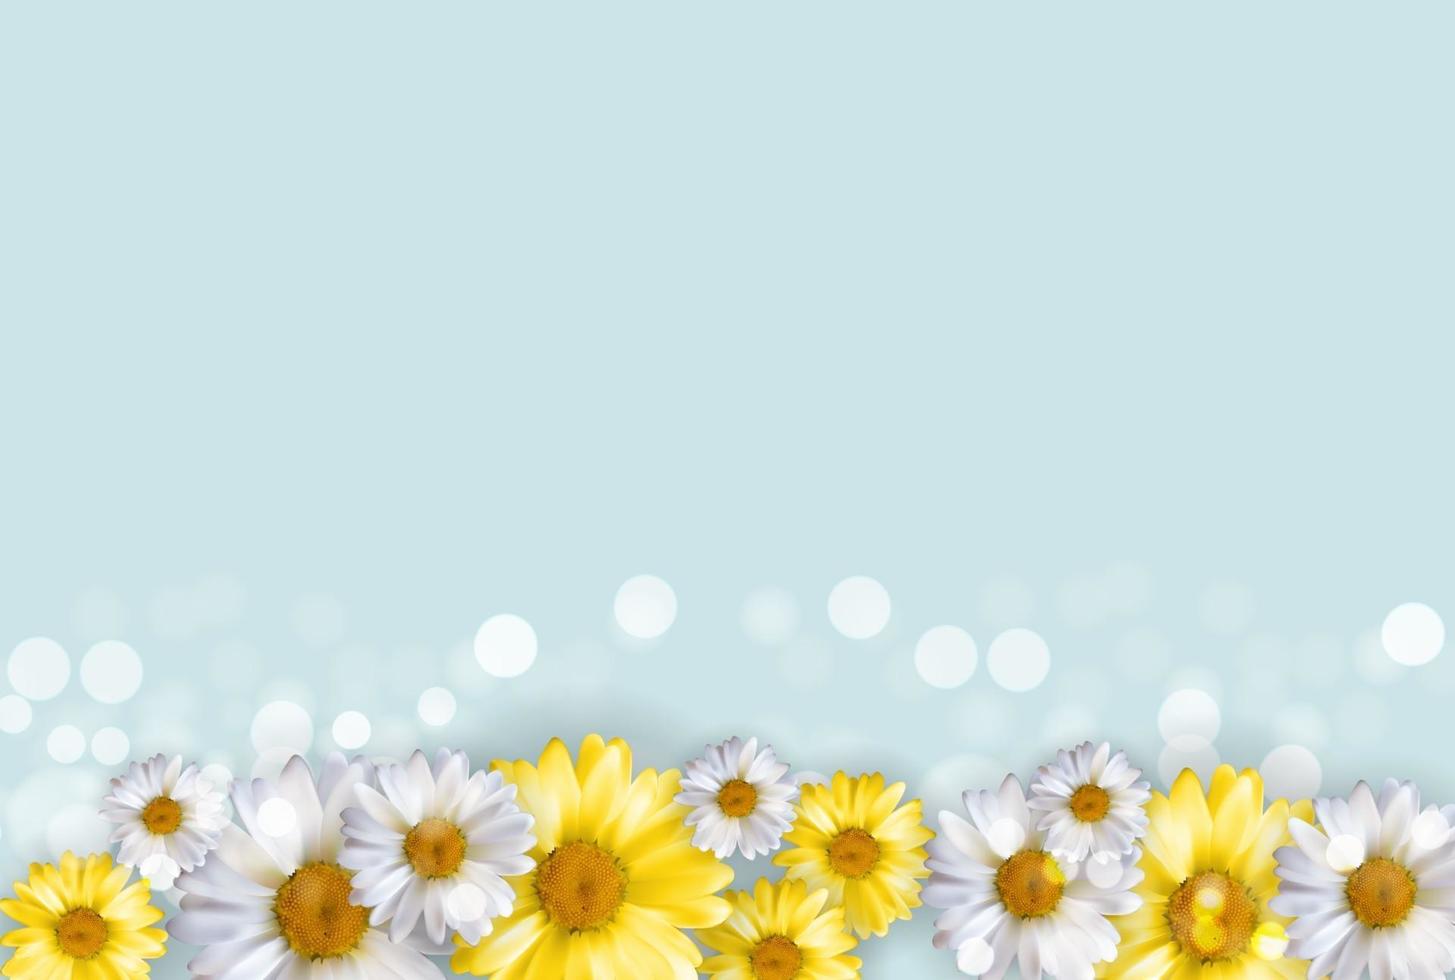 Cute Background with Chamomile Flowers. vector